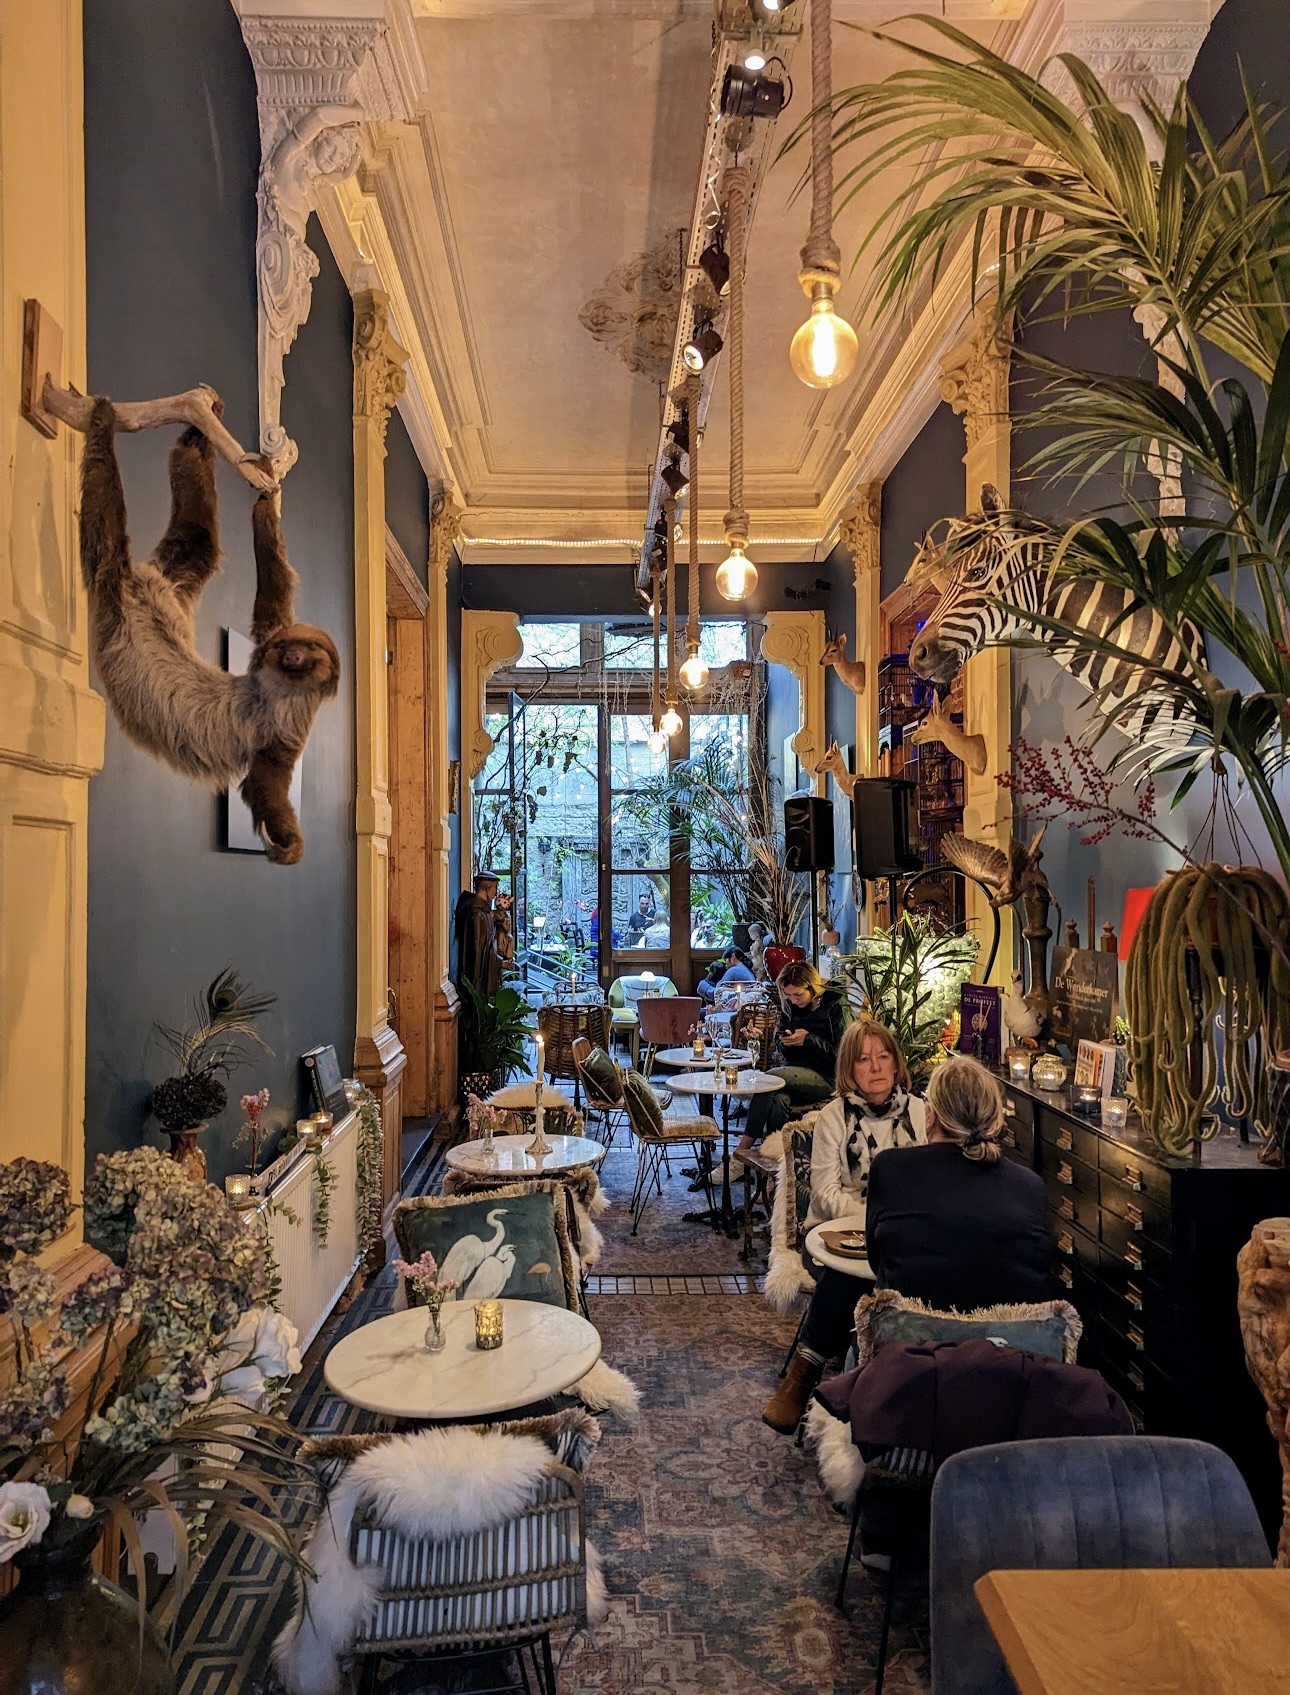 pelgrimhuis restaurant interior in Antwerp Belgium with taxidermy sloth and taxidermy zebra hanging on wall